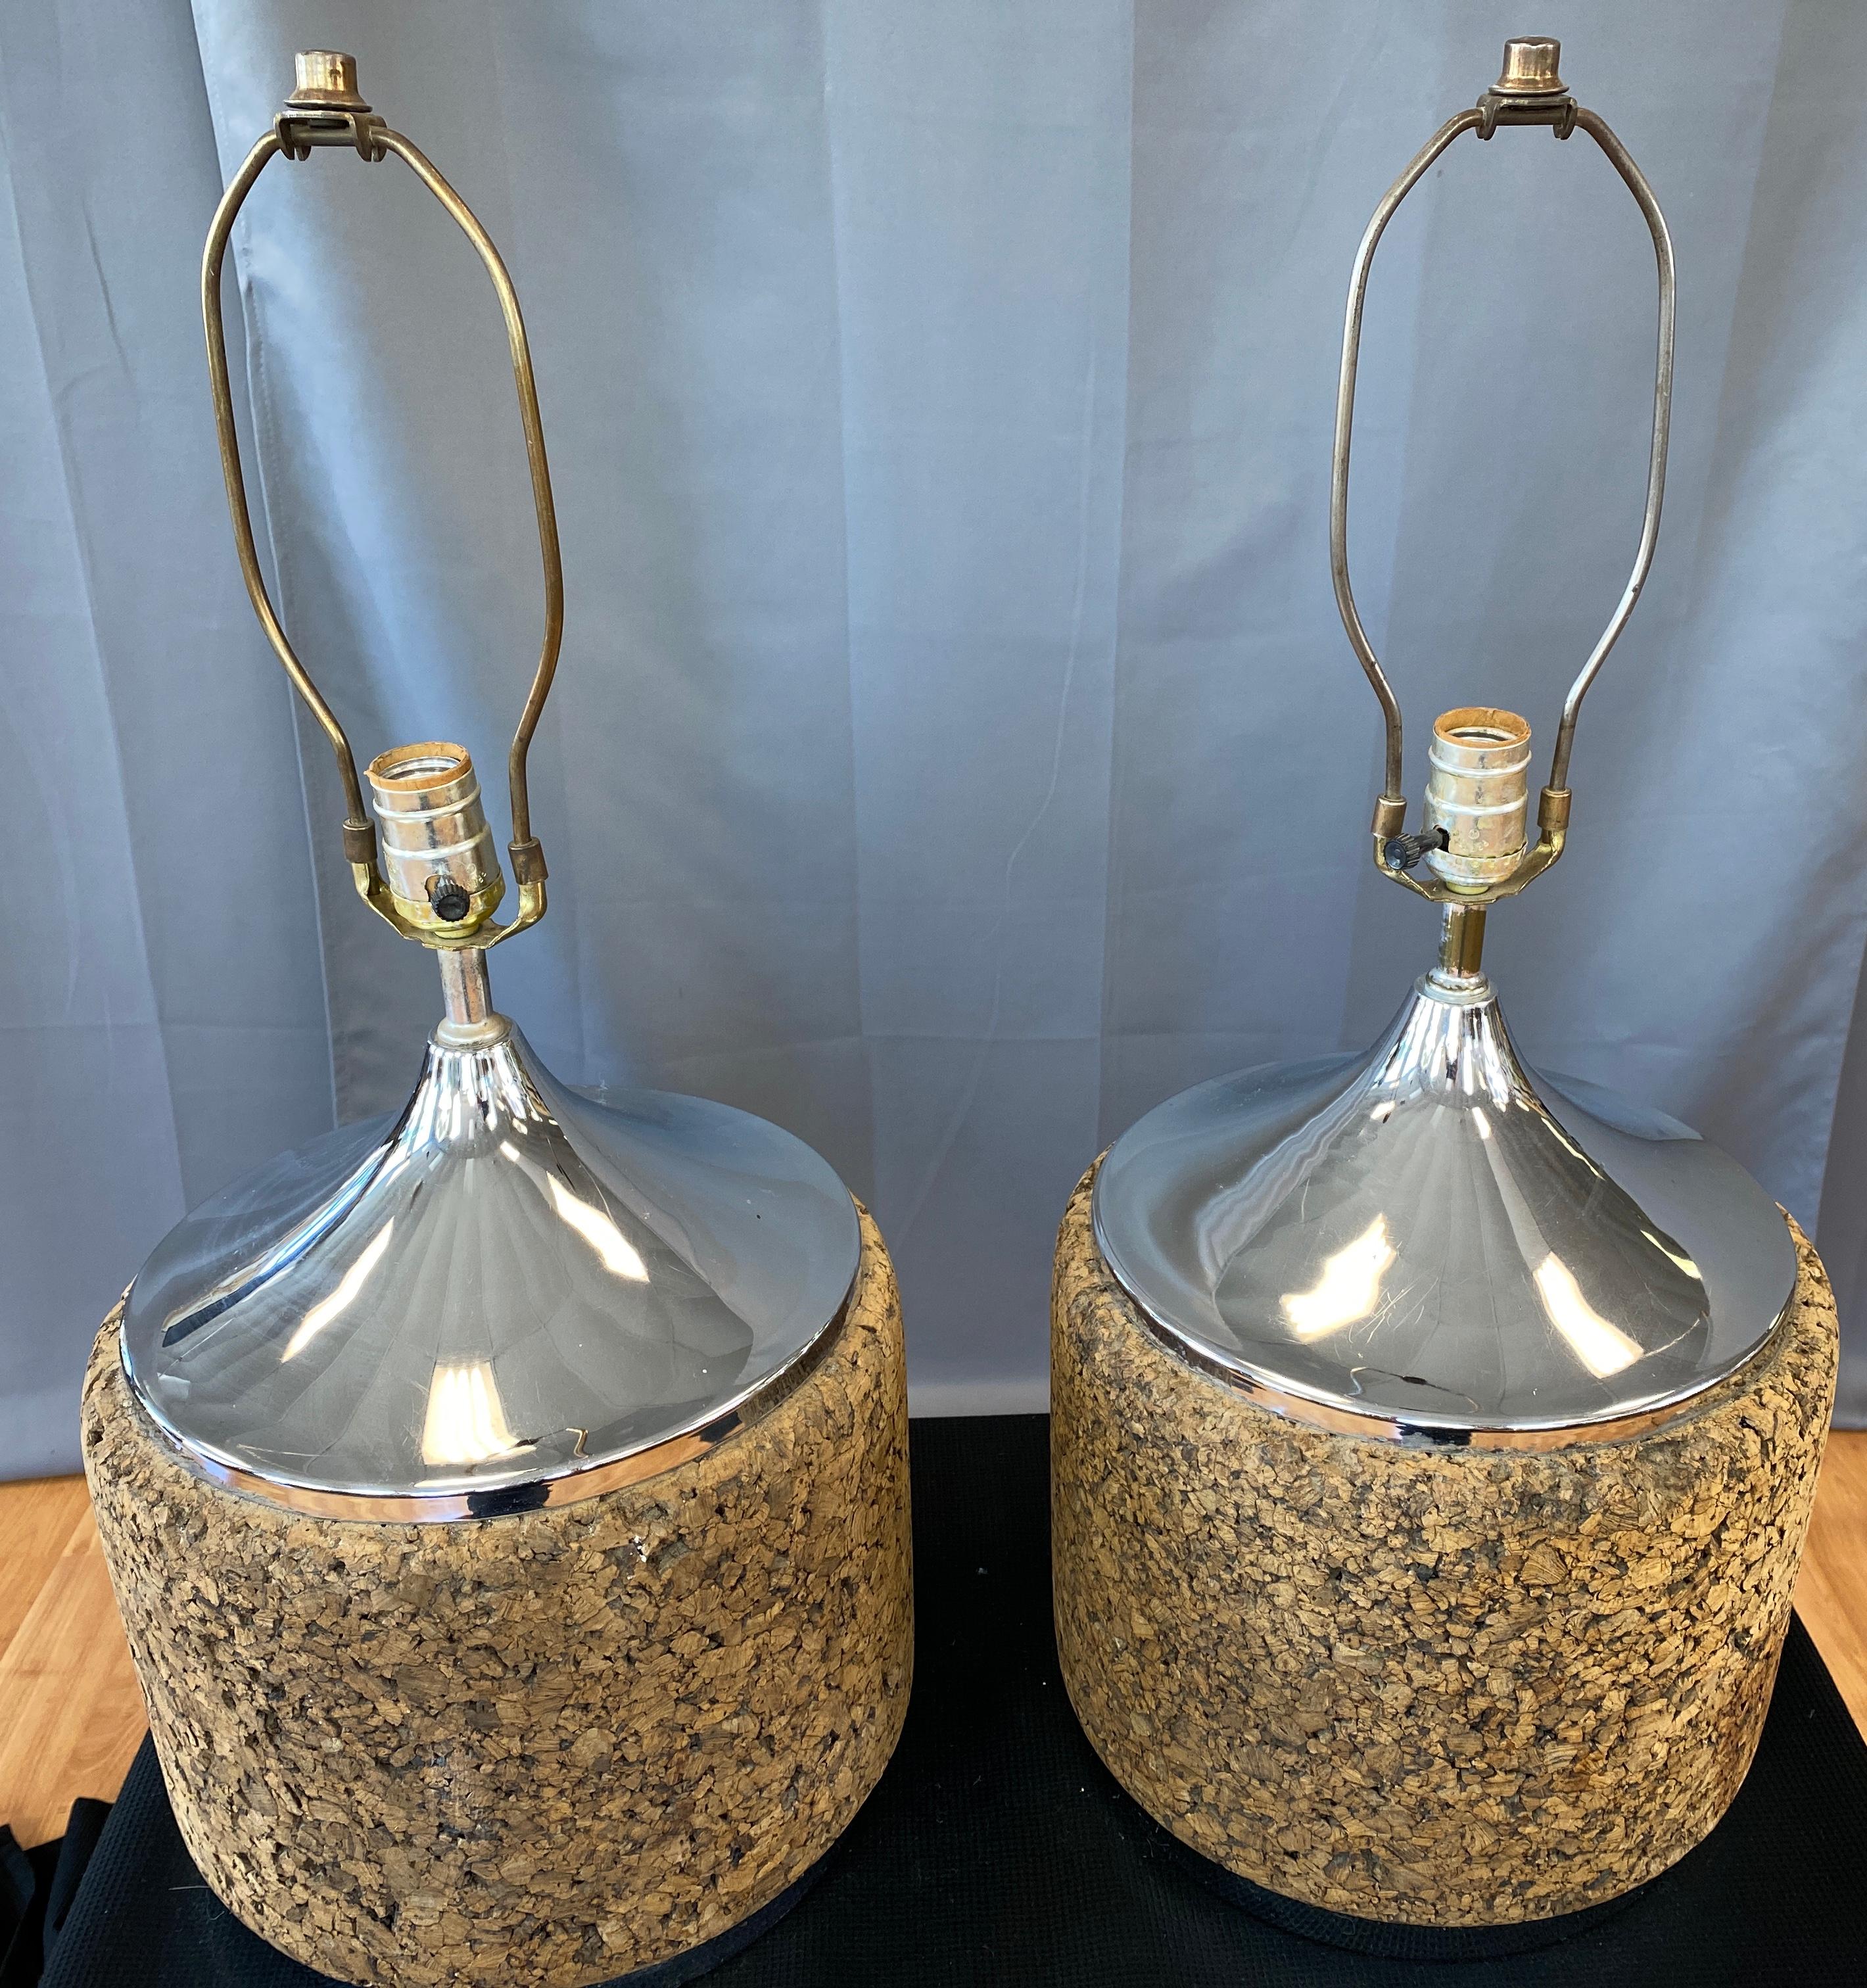 A great looking pair of classic 1970s MOD Cork lamps,
Many pieces of cork formed into a nice barrel shape, with a chromed metal holding all together from its top and bottom.

17 inches top of socket, 35 1/2 in circumference, over all below.